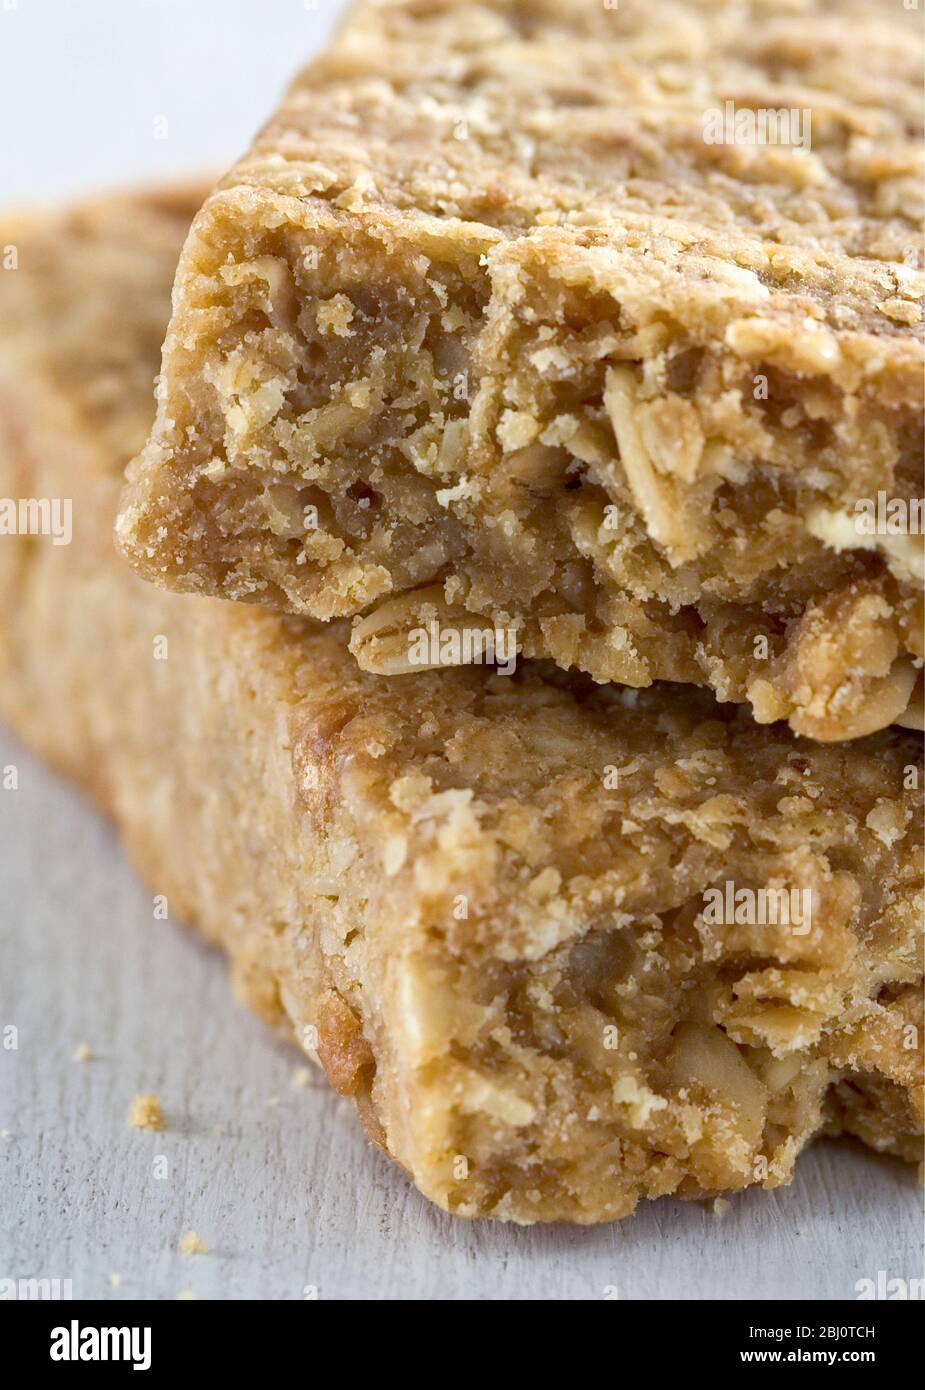 Cereal bar as breakfast substitute - Stock Photo